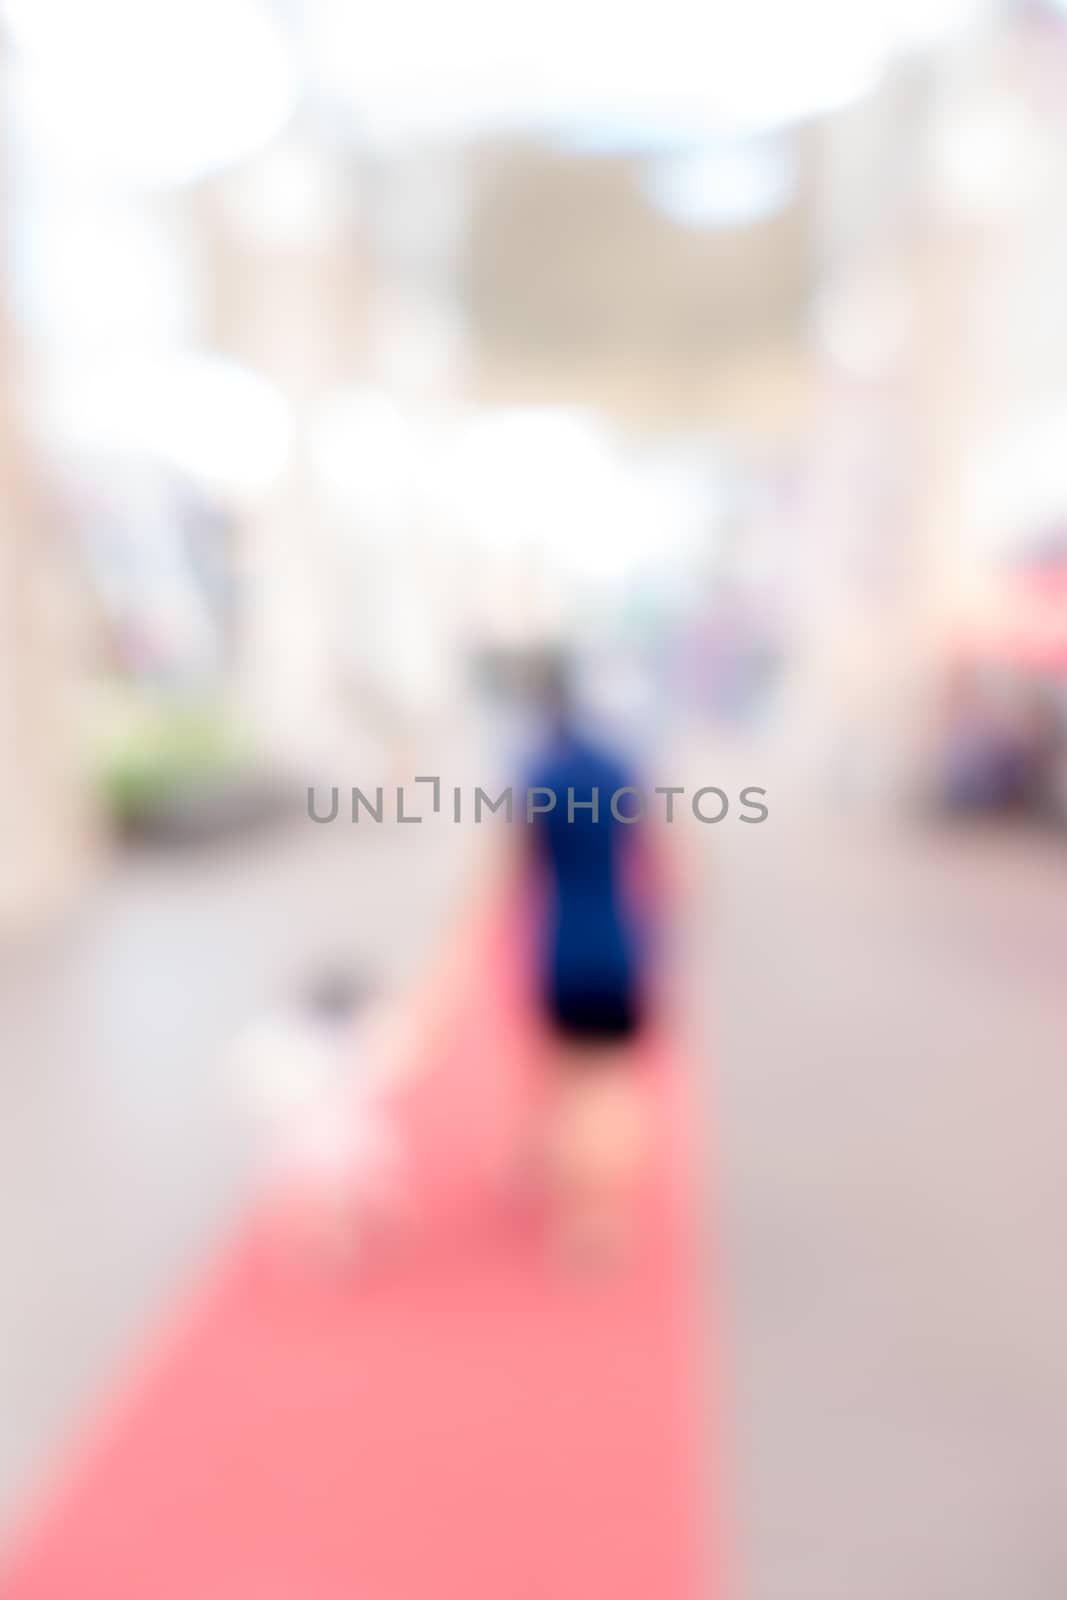 Abstrast Blurred background : shopping mall